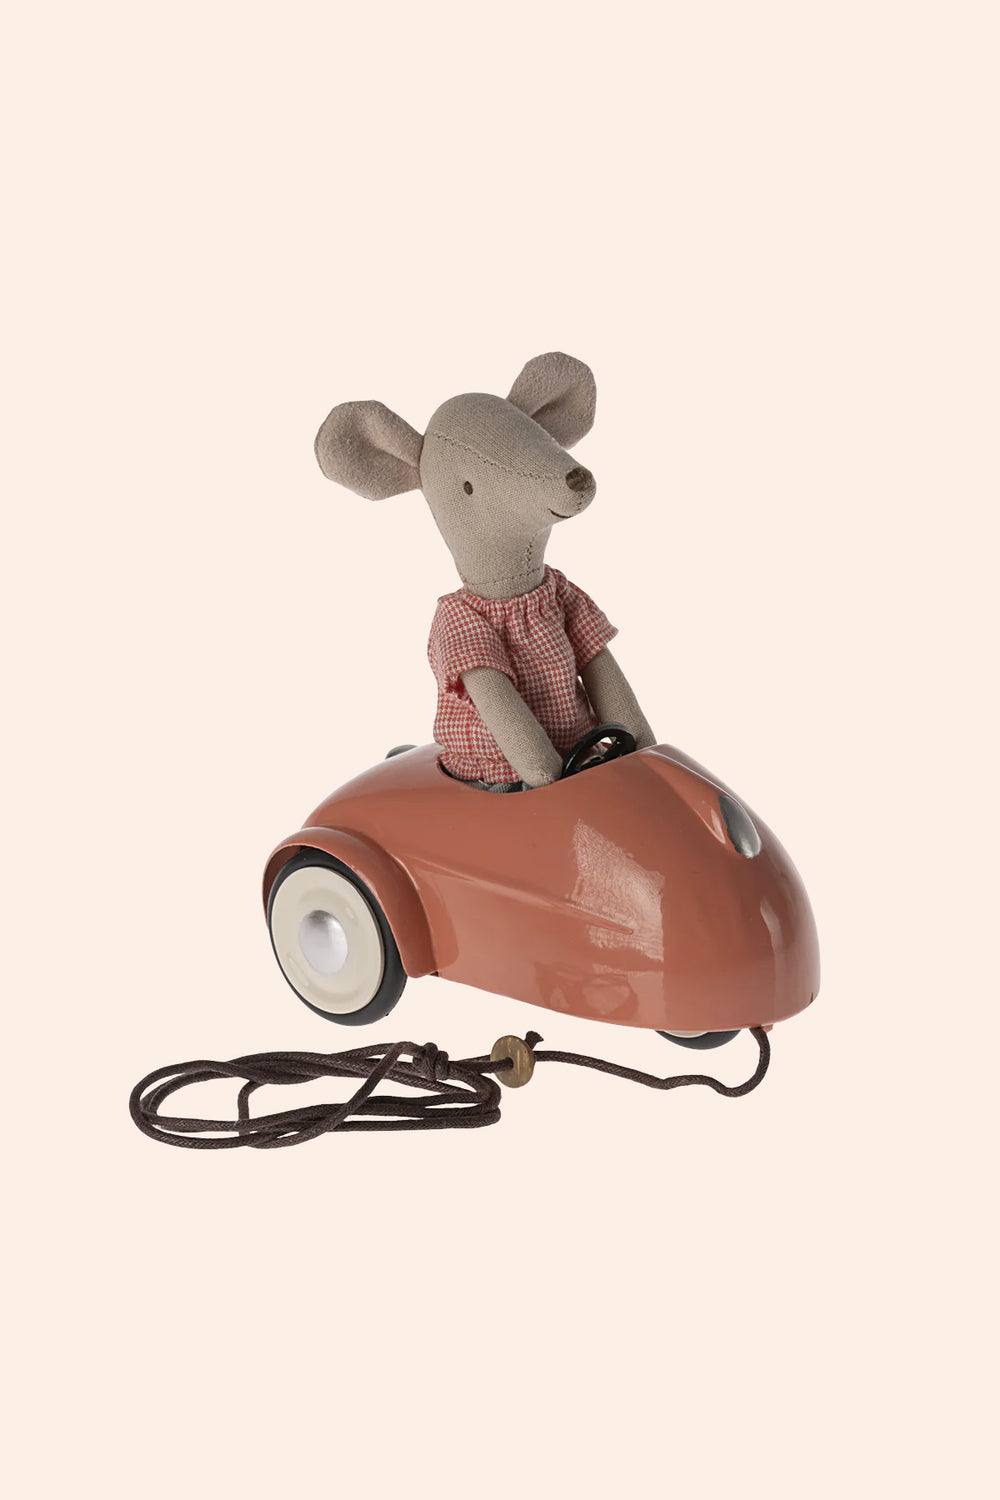 Maileg Mouse Car - Coral